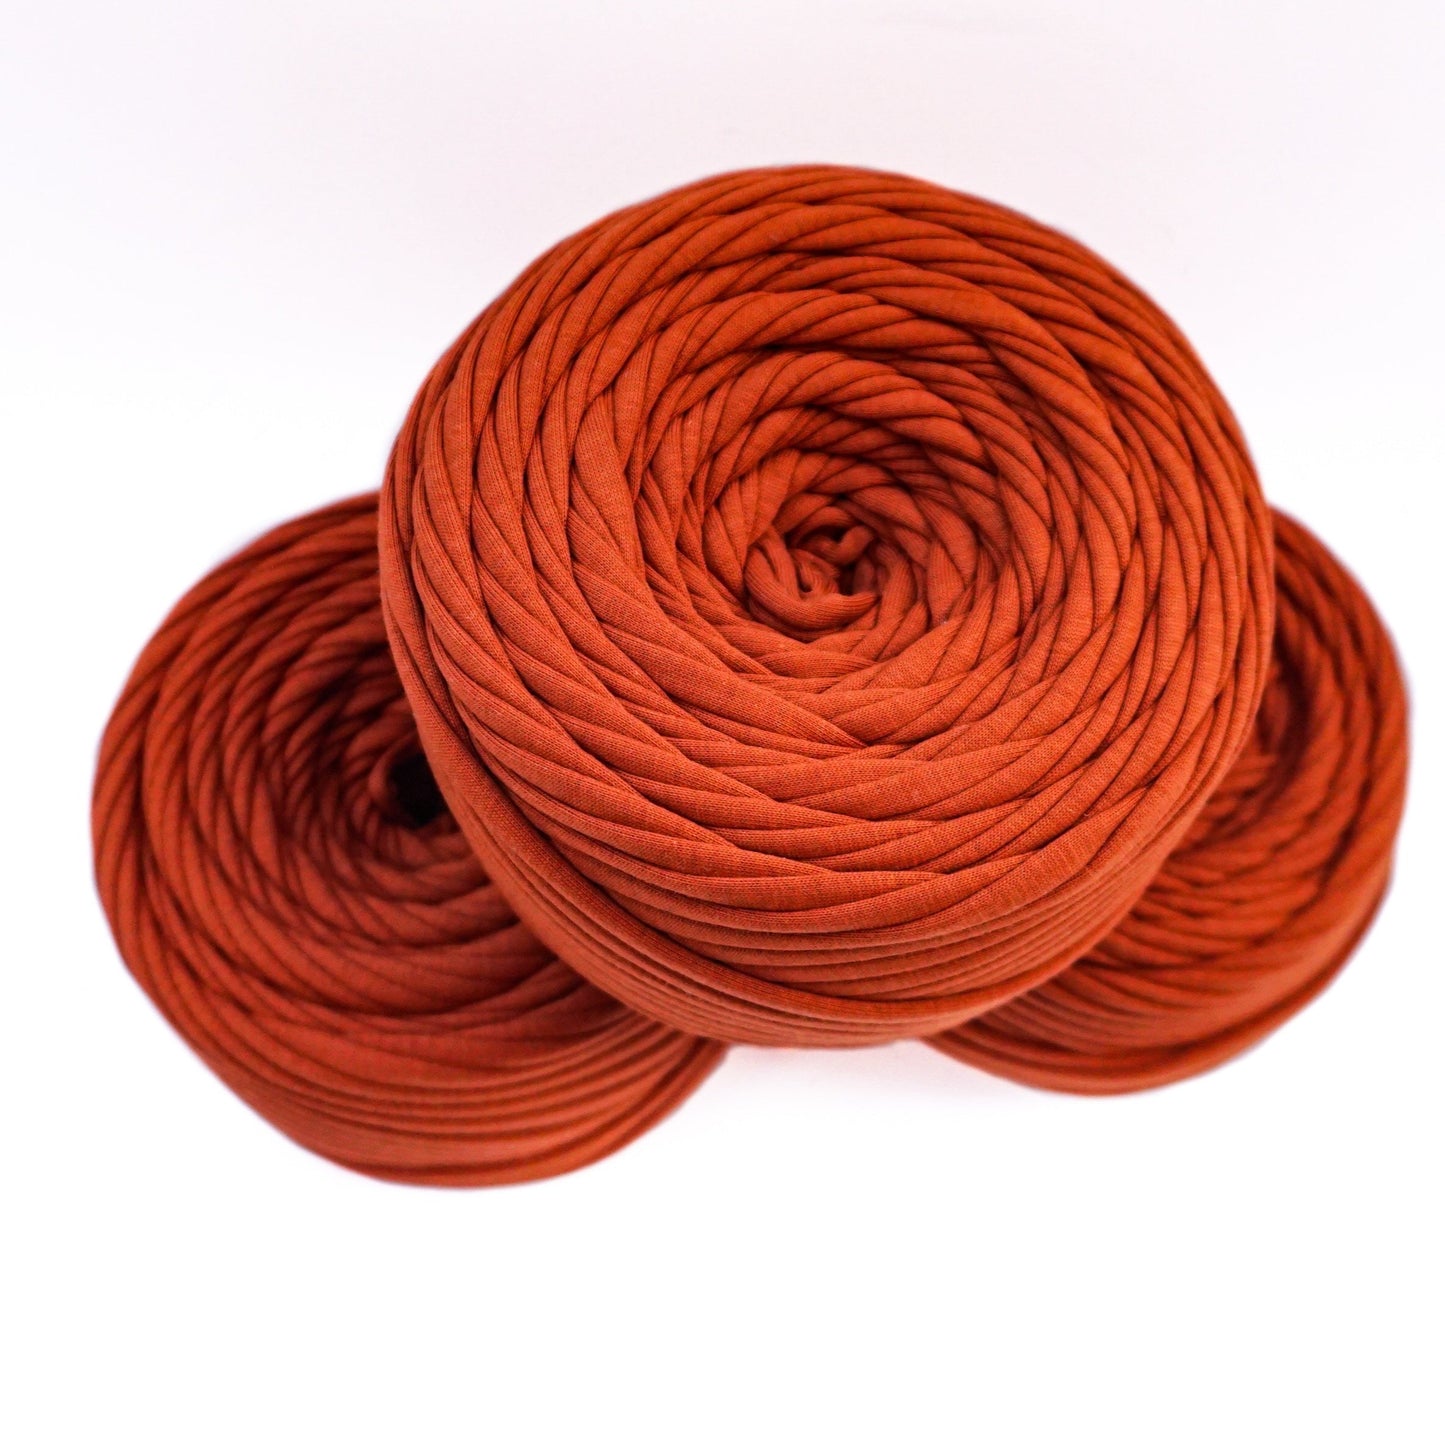 T-shirt yarn for crocheting baskets, bags, rugs and home decor. Burnt orange